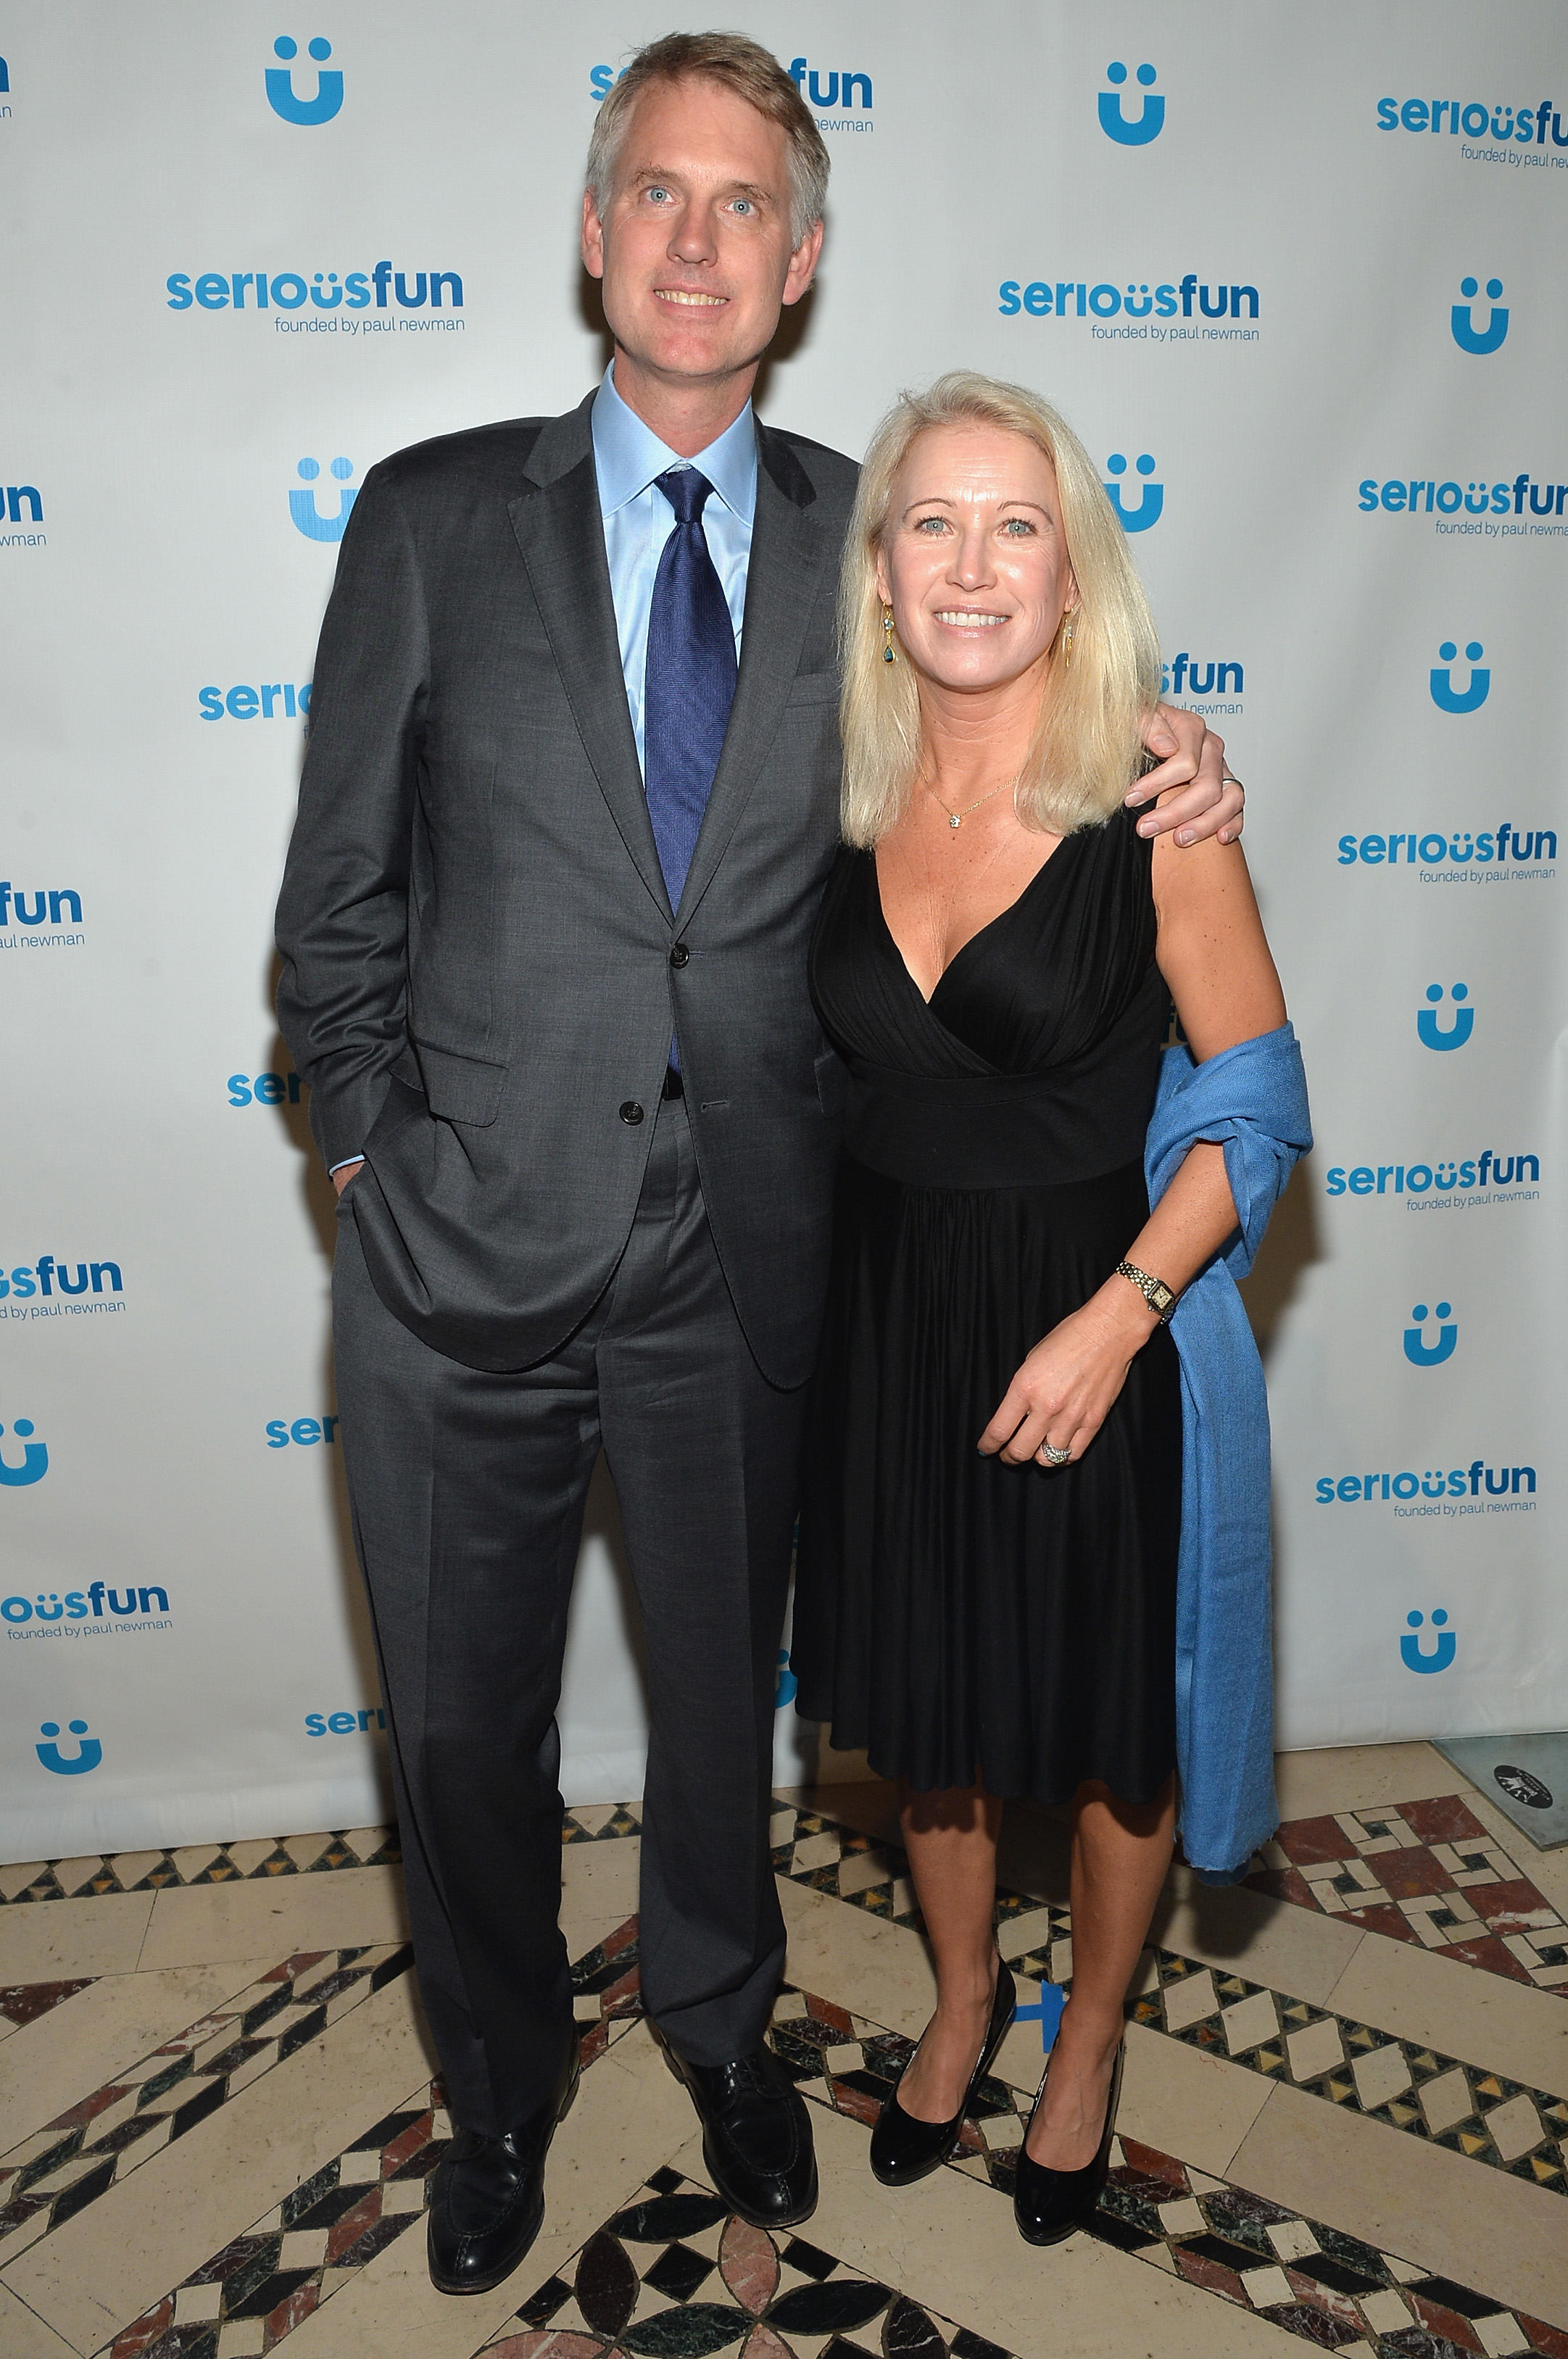 Kurt Soderlund and Claire Olivia Newman attend the SeriousFun Children's Network Gala at Cipriani 42nd Street on April 2, 2014, in New York City. | Source: Getty Images